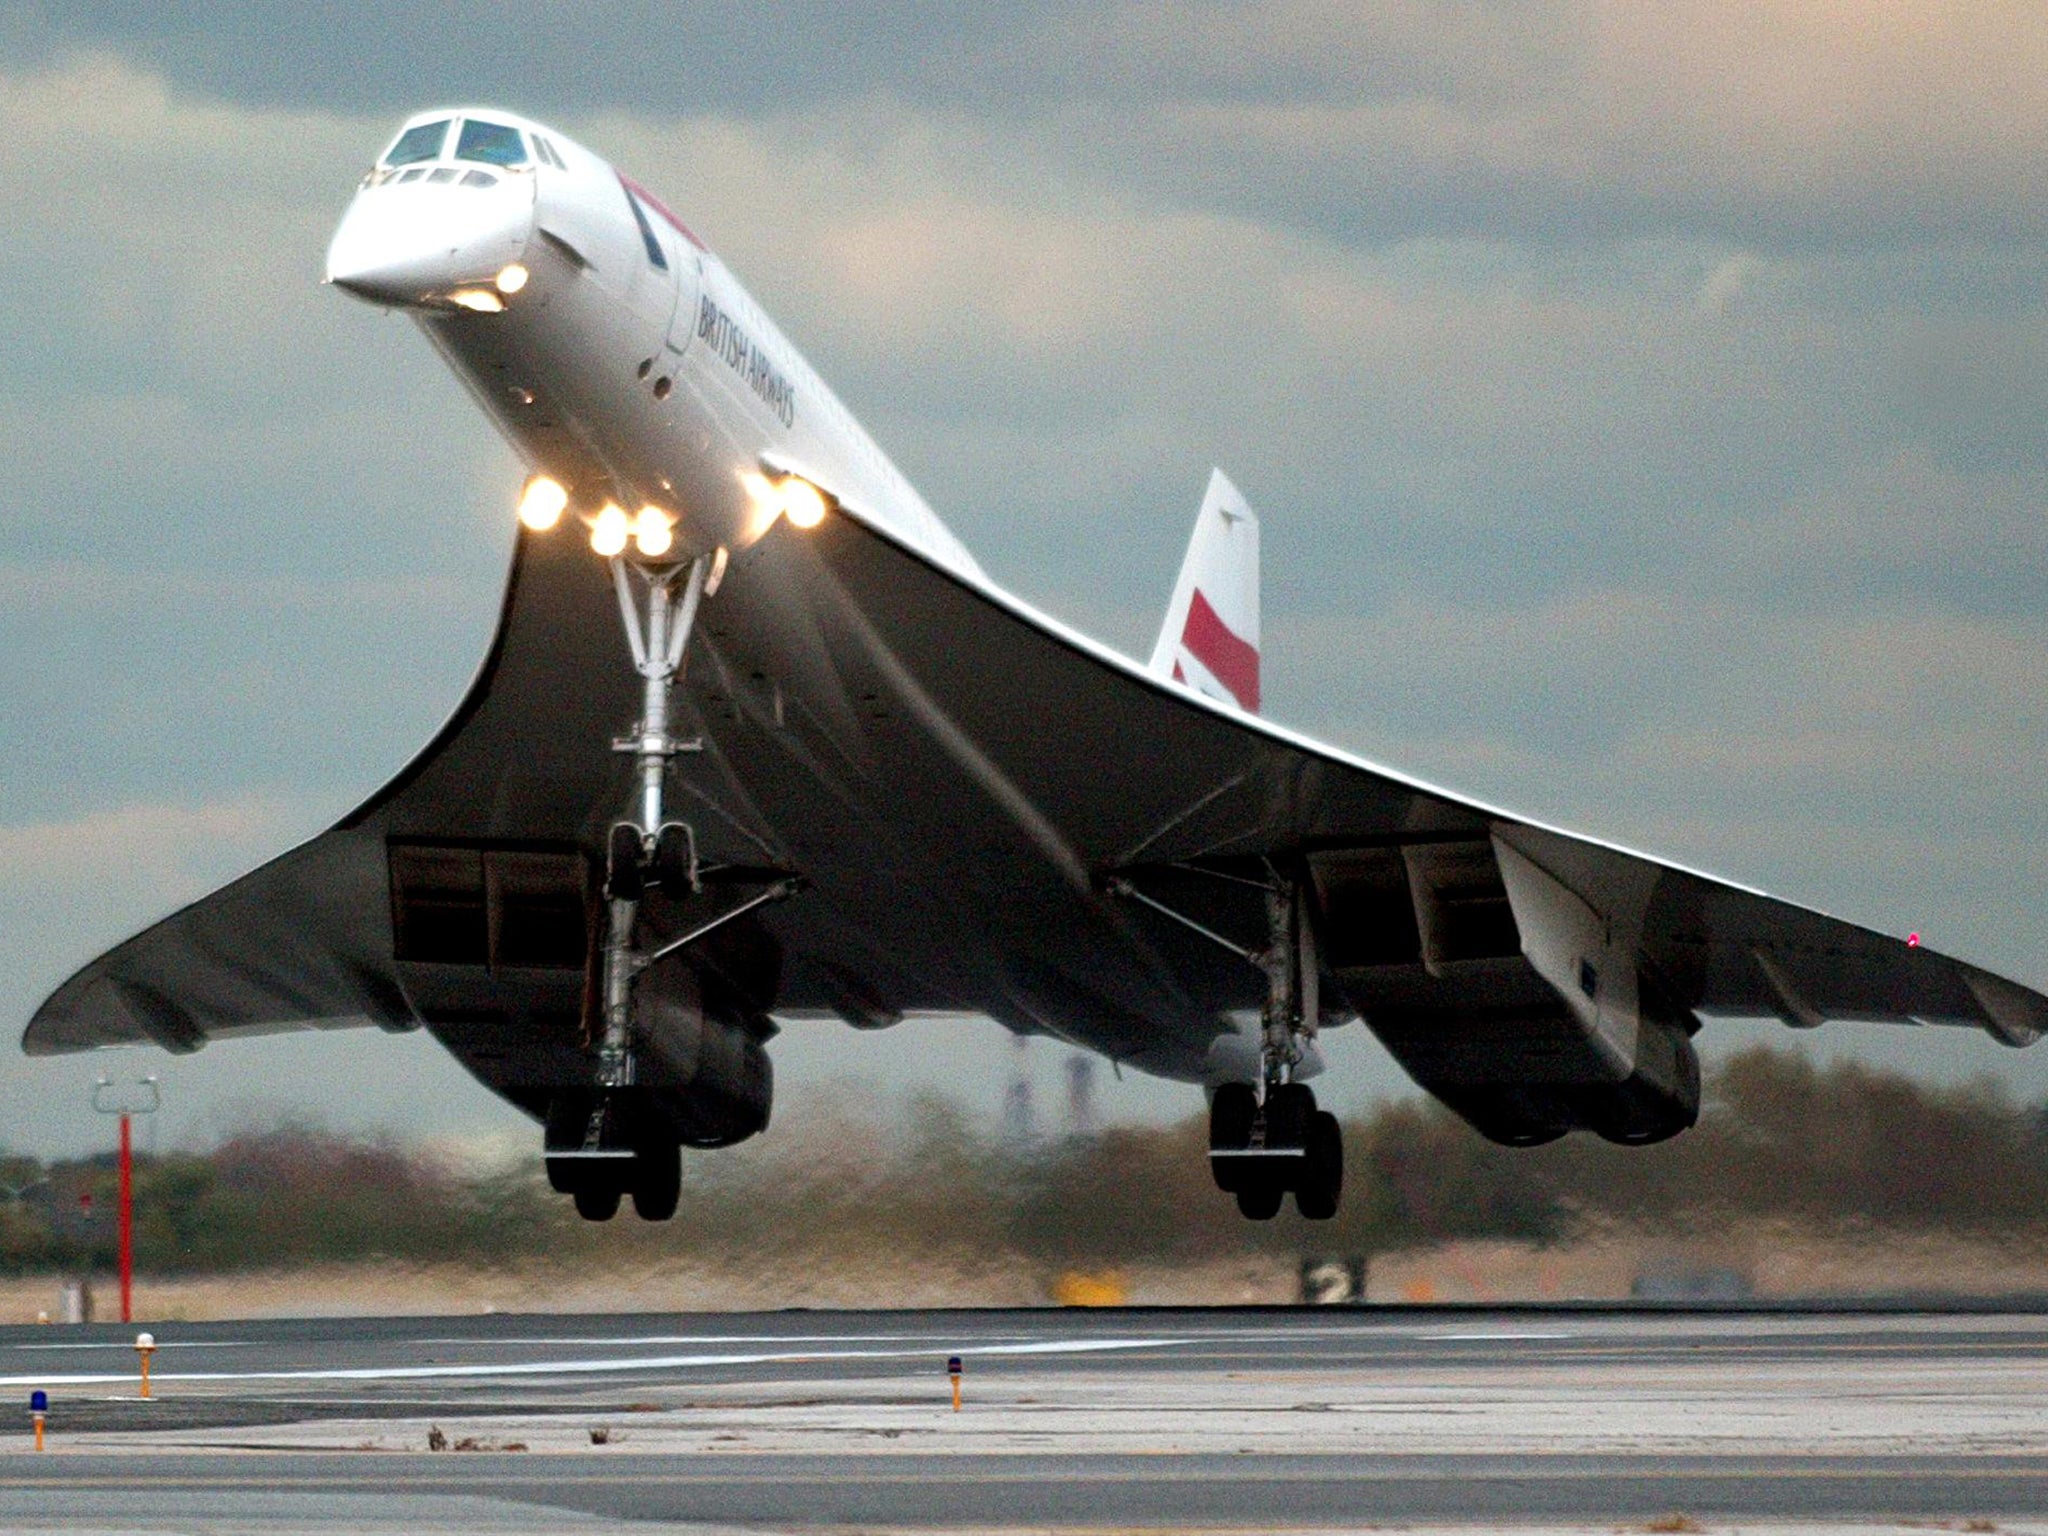 Supersonic flight: Concorde's successors are in the works 15 years on ...